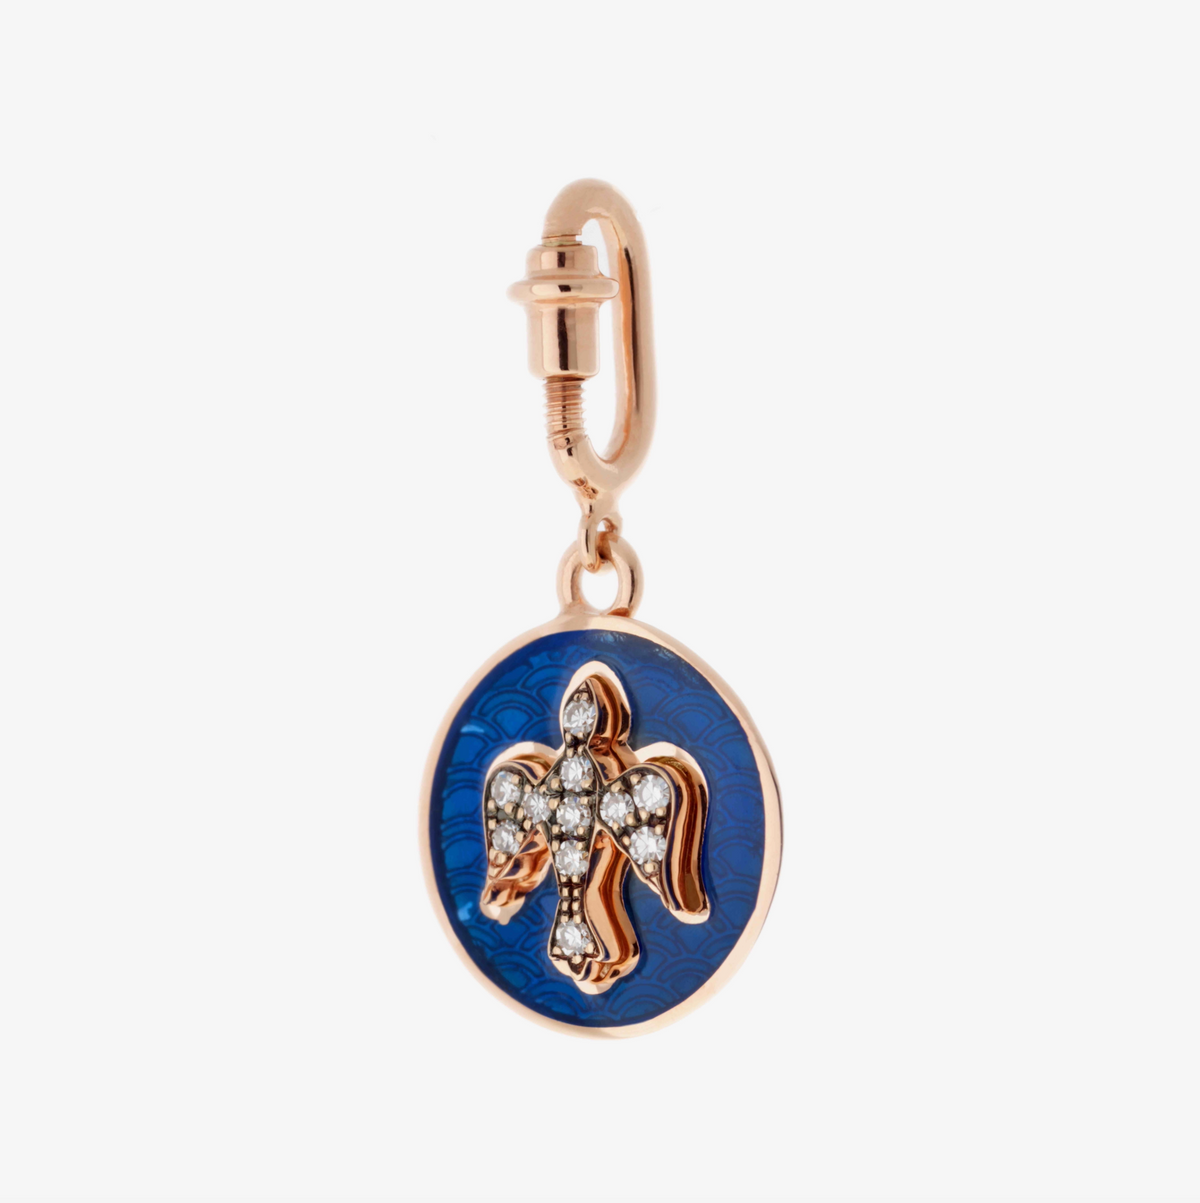 Diamond dove Charm in pink gold and blue enamel